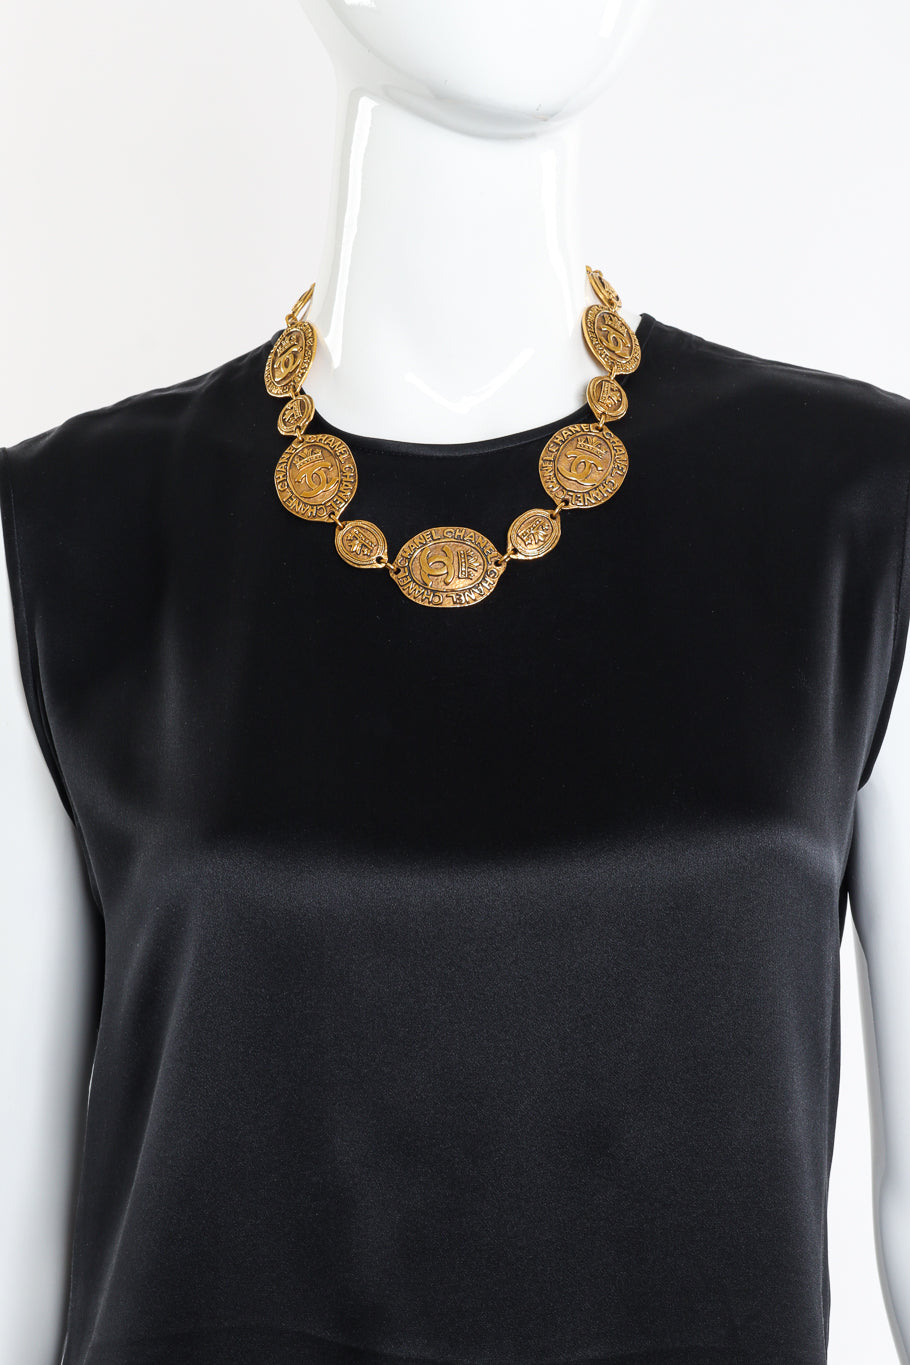 CC Crown Medallion Necklace by Chanel on mannequin @recessla